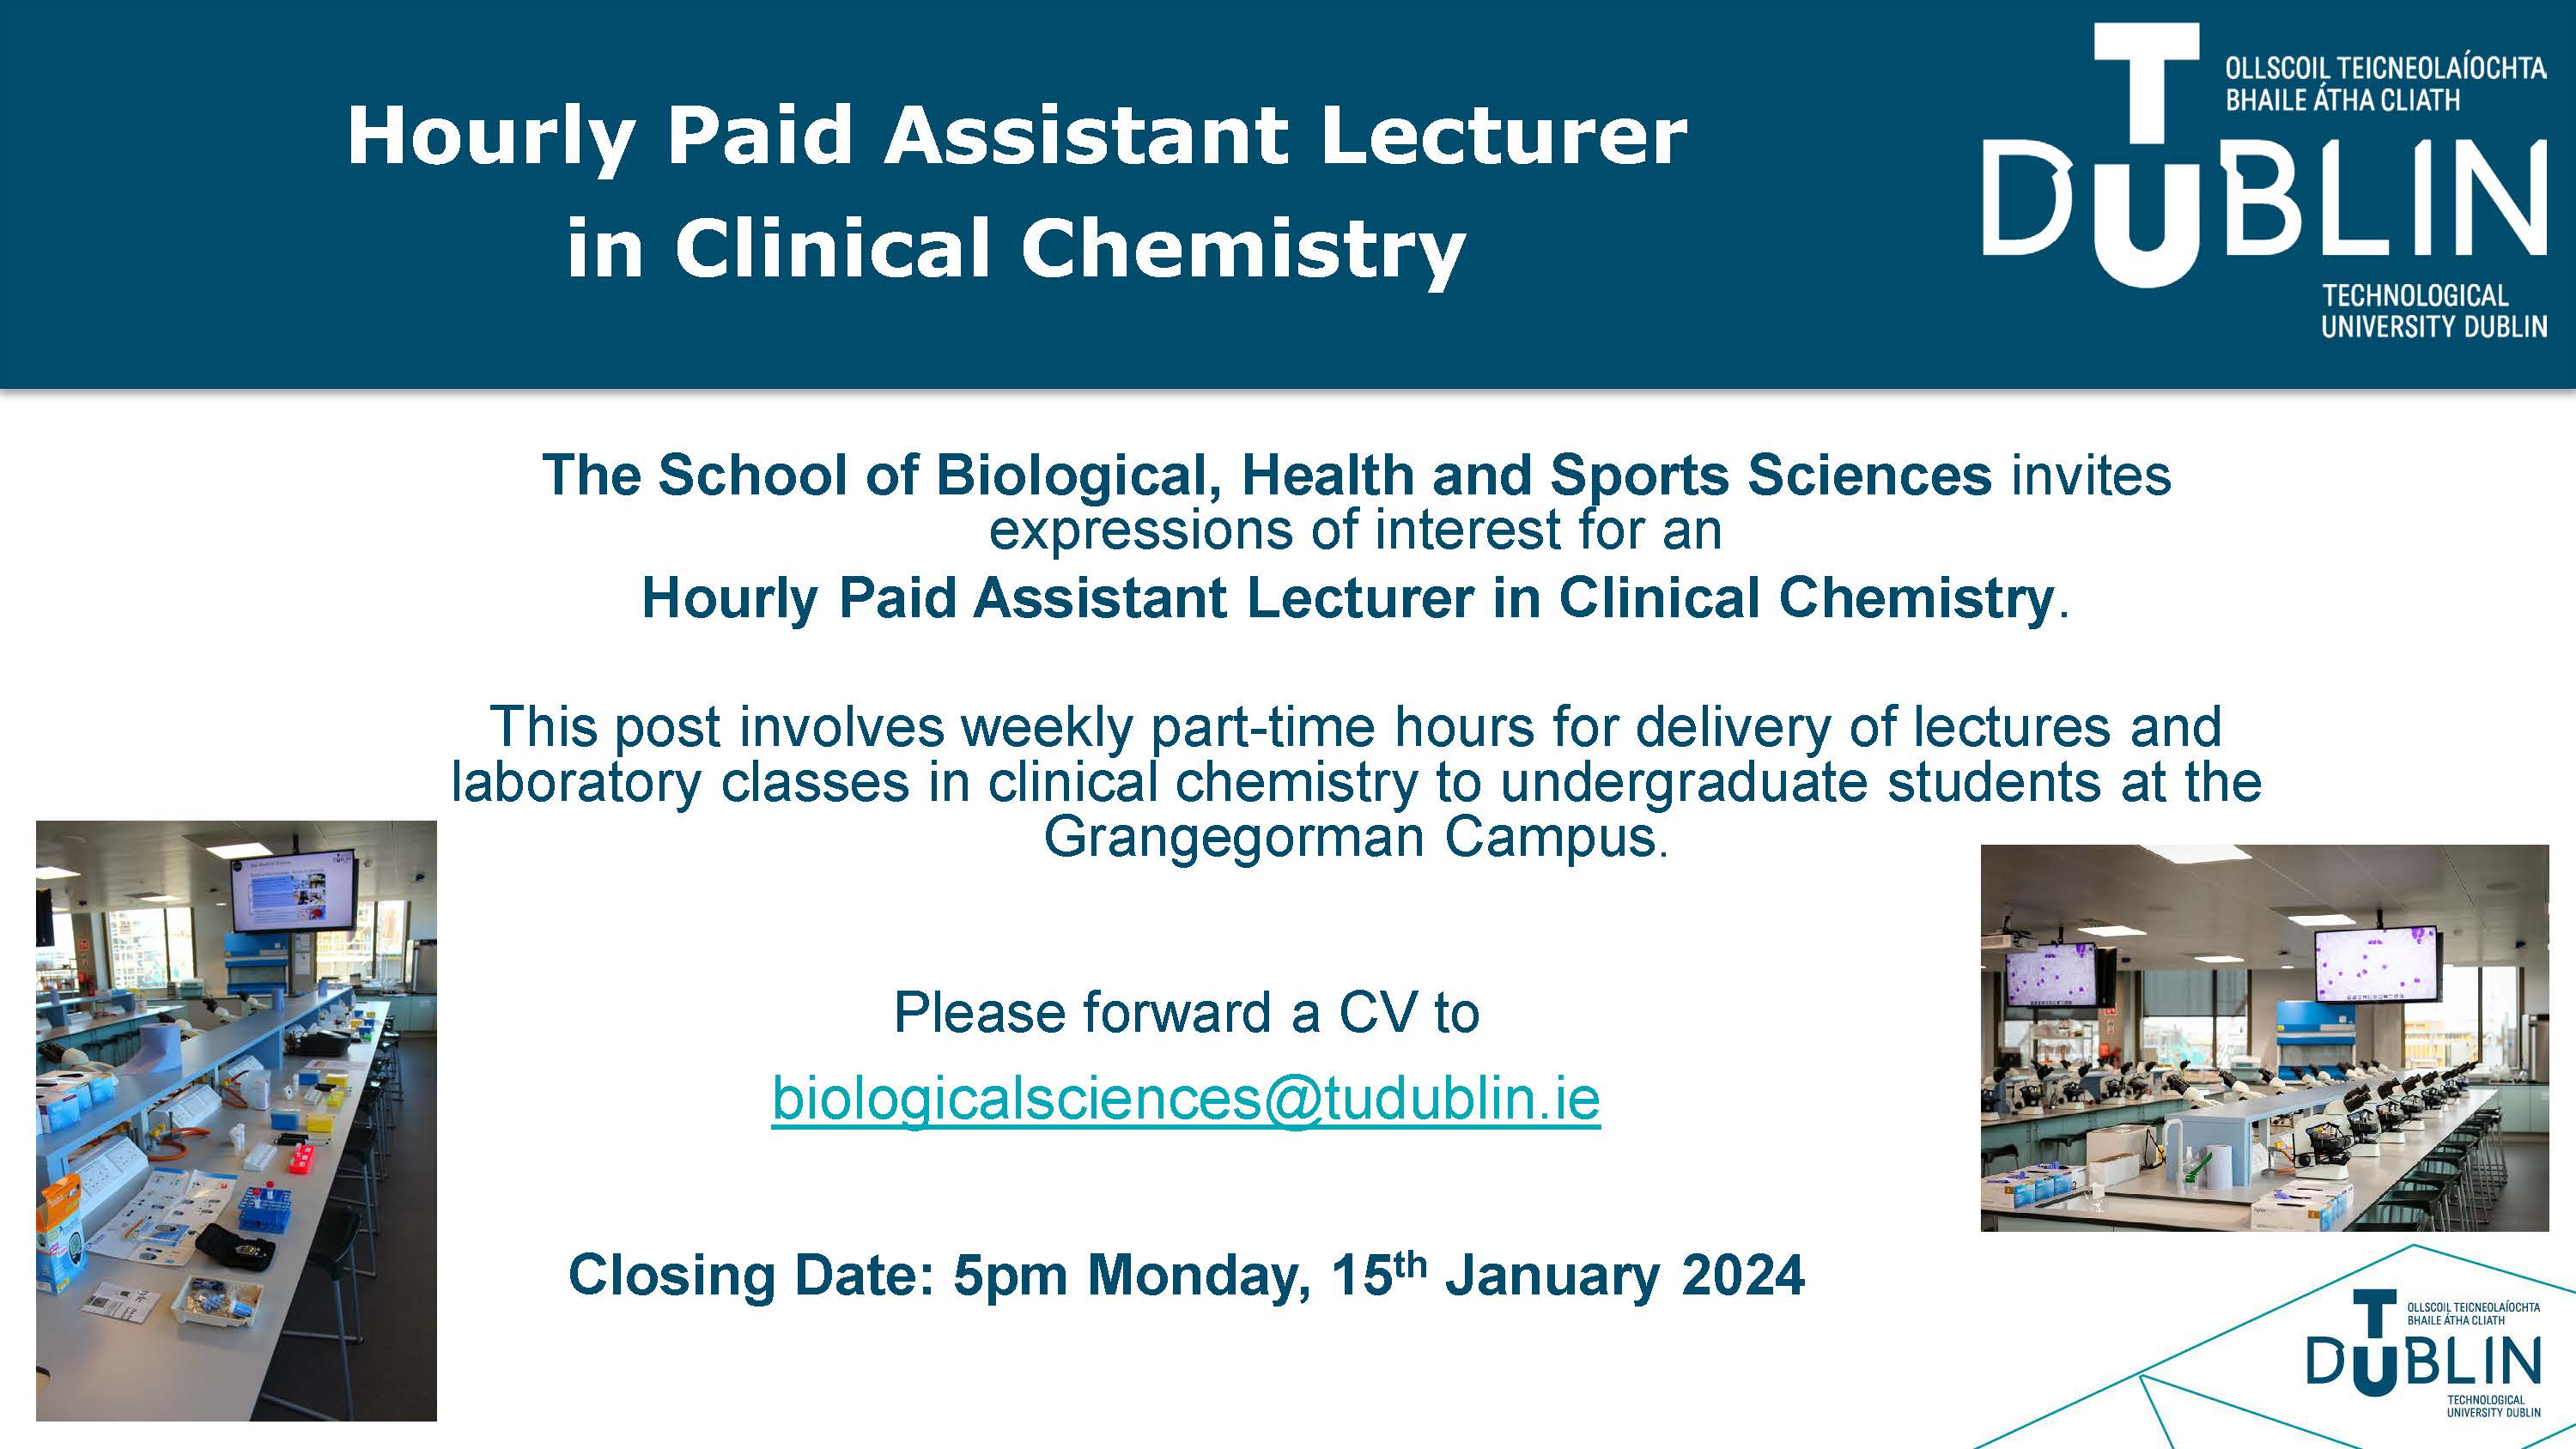 image for Hourly Paid Assistant Lecturer in Clinical Chemistry Position